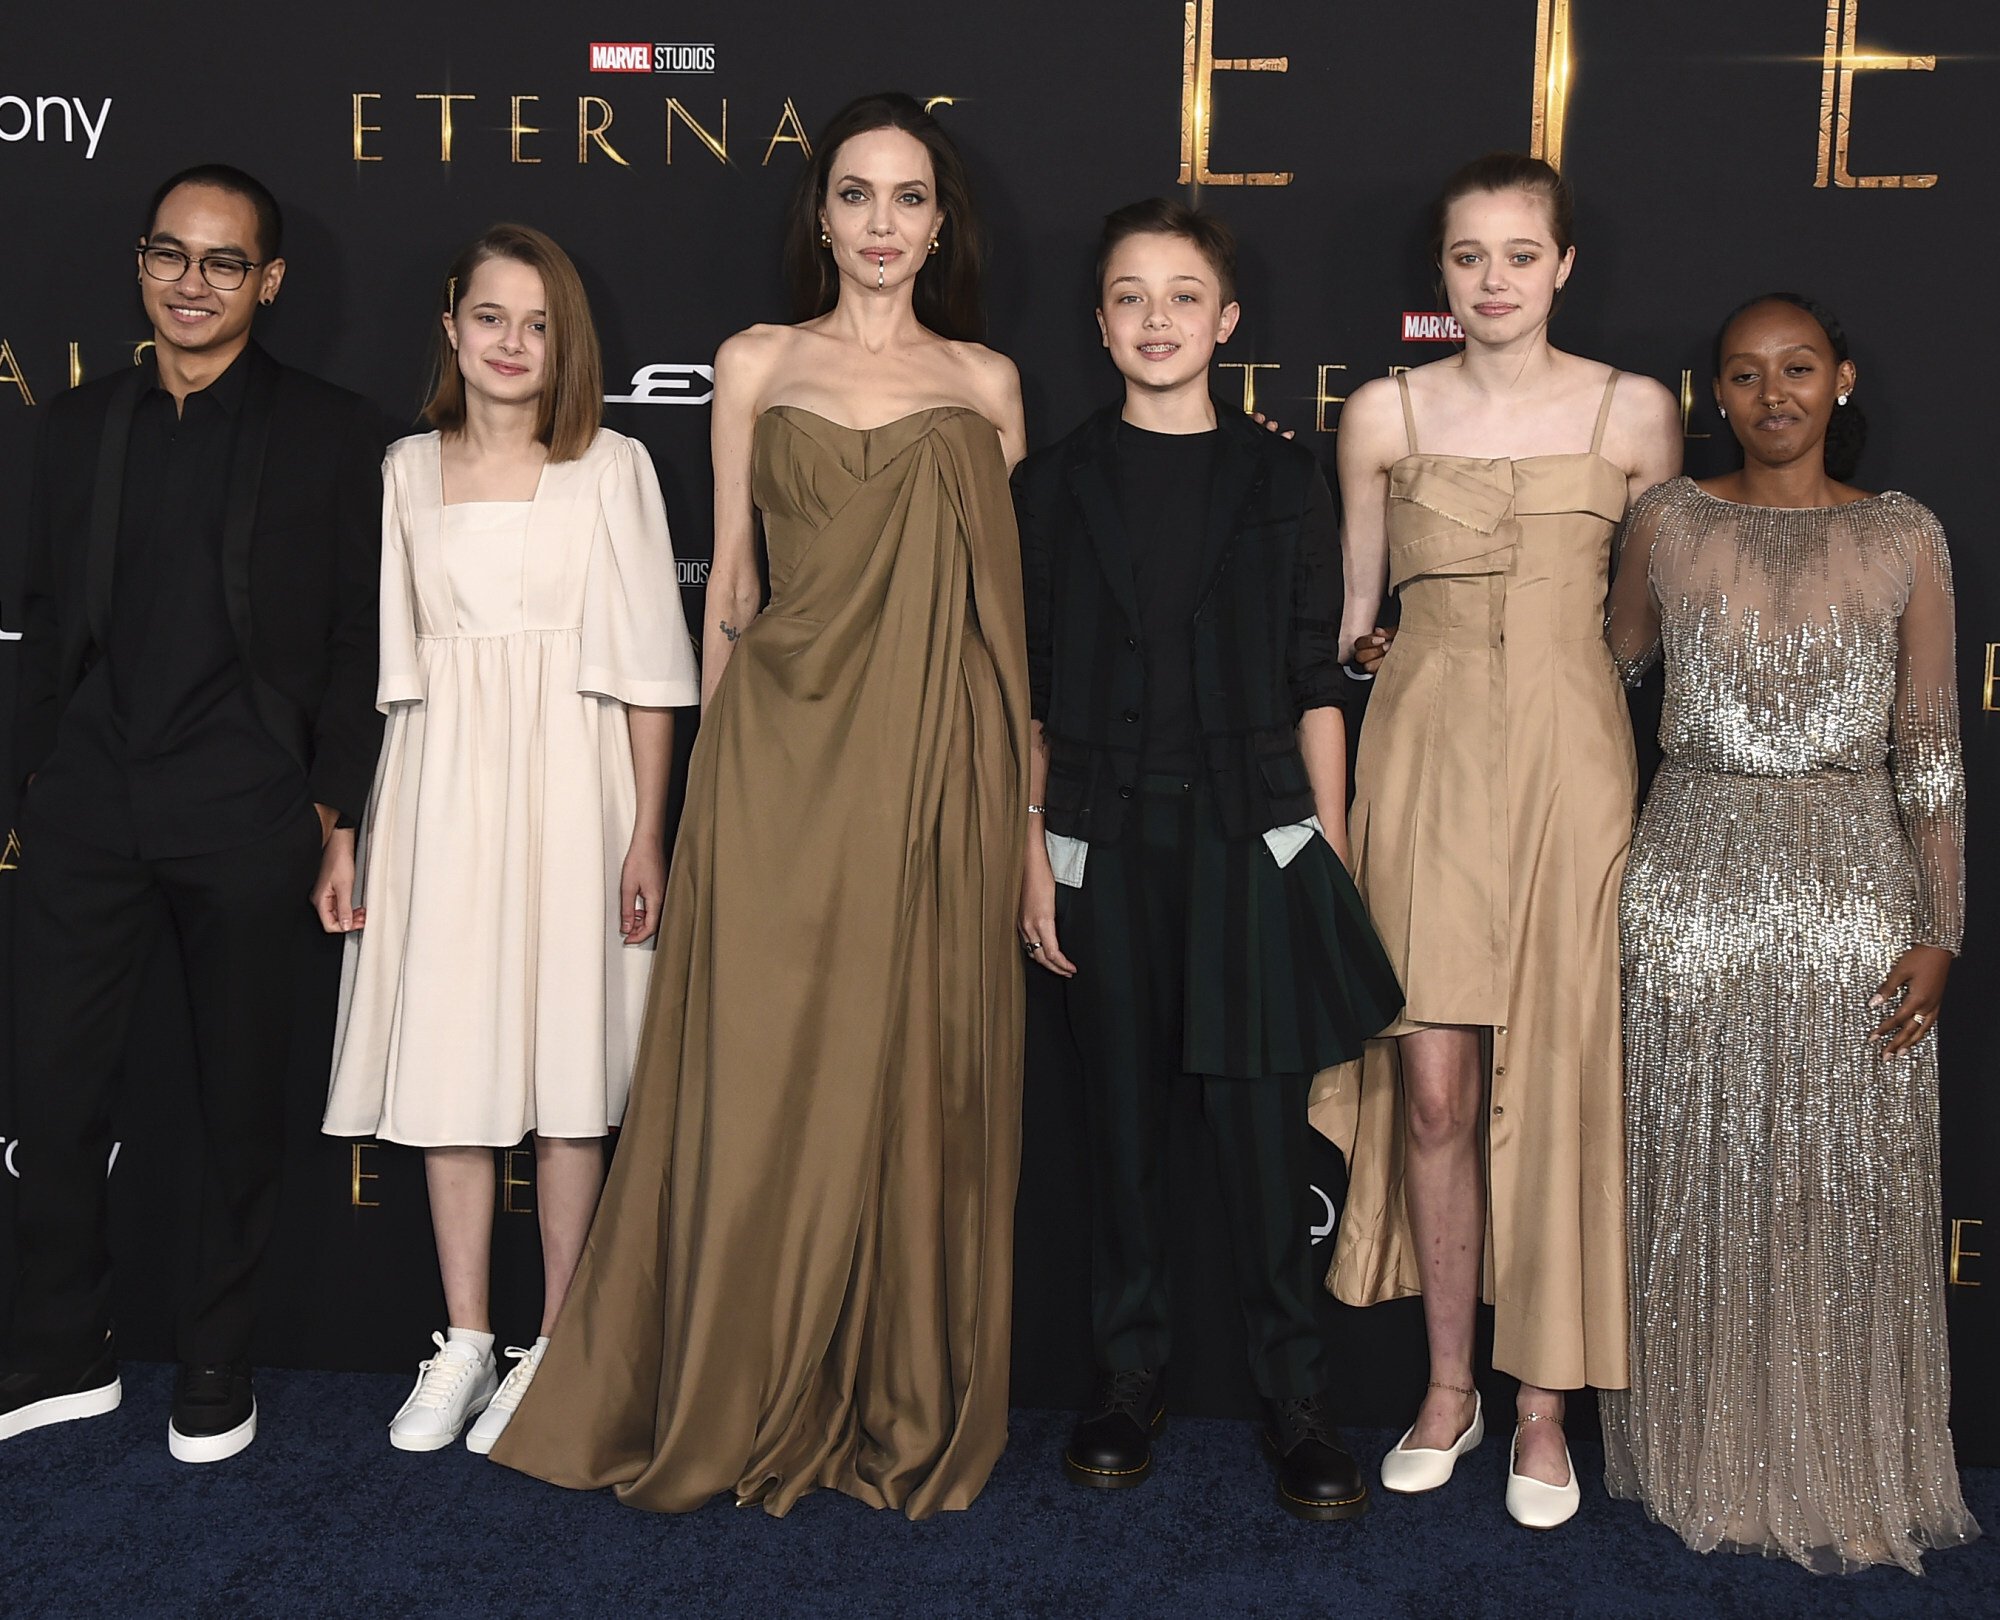 Angelina Jolie with children Maddox, Vivienne, Knox, Shiloh and Zahara Jolie-Pitt arrive at the Los Angeles premiere of Eternals on October 18. Photo: Invision/AP